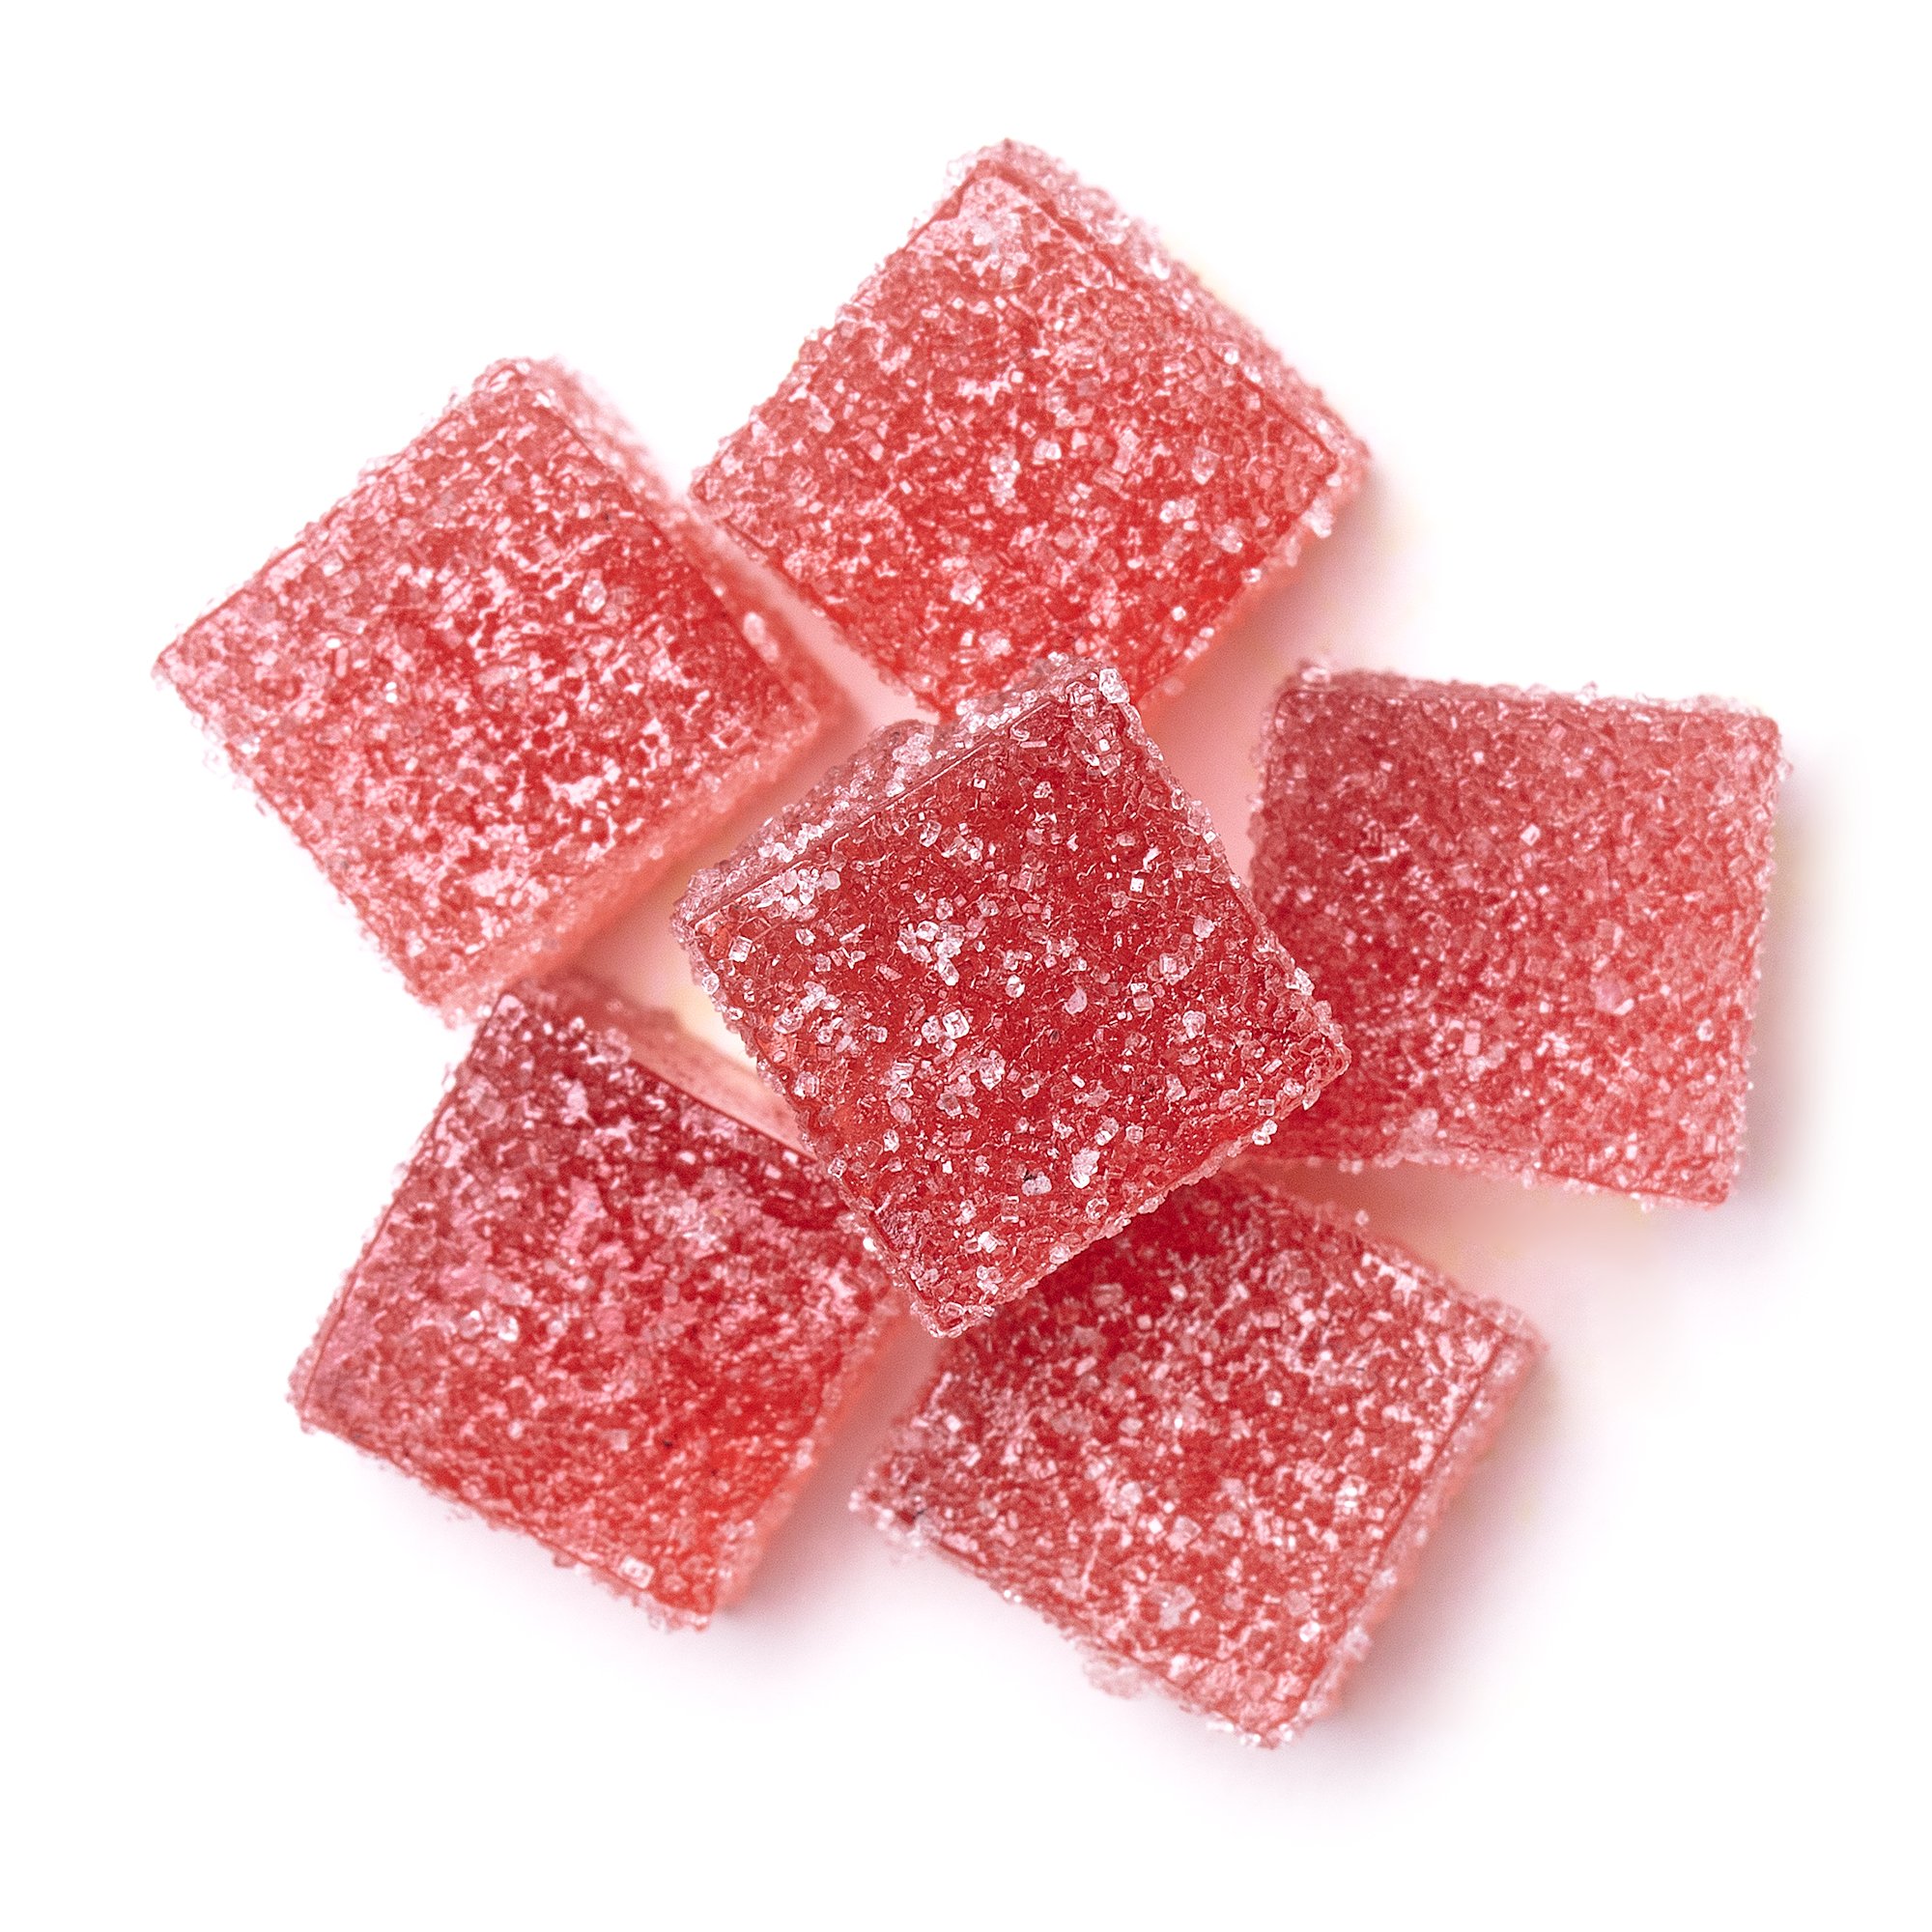 Where can I get the best quality hHC gummies?